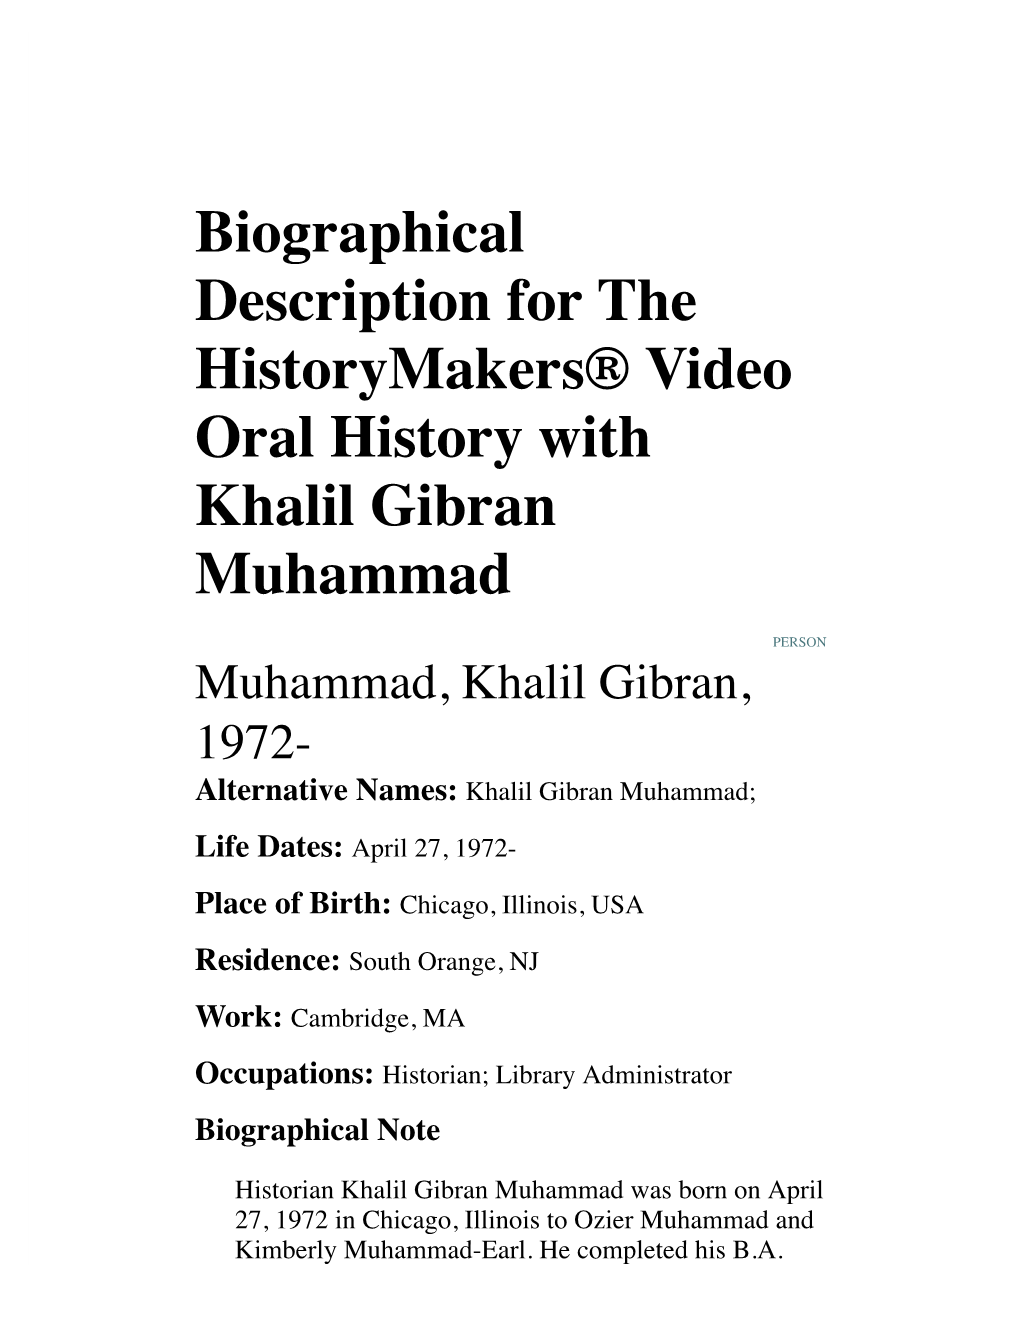 Biographical Description for the Historymakers® Video Oral History with Khalil Gibran Muhammad